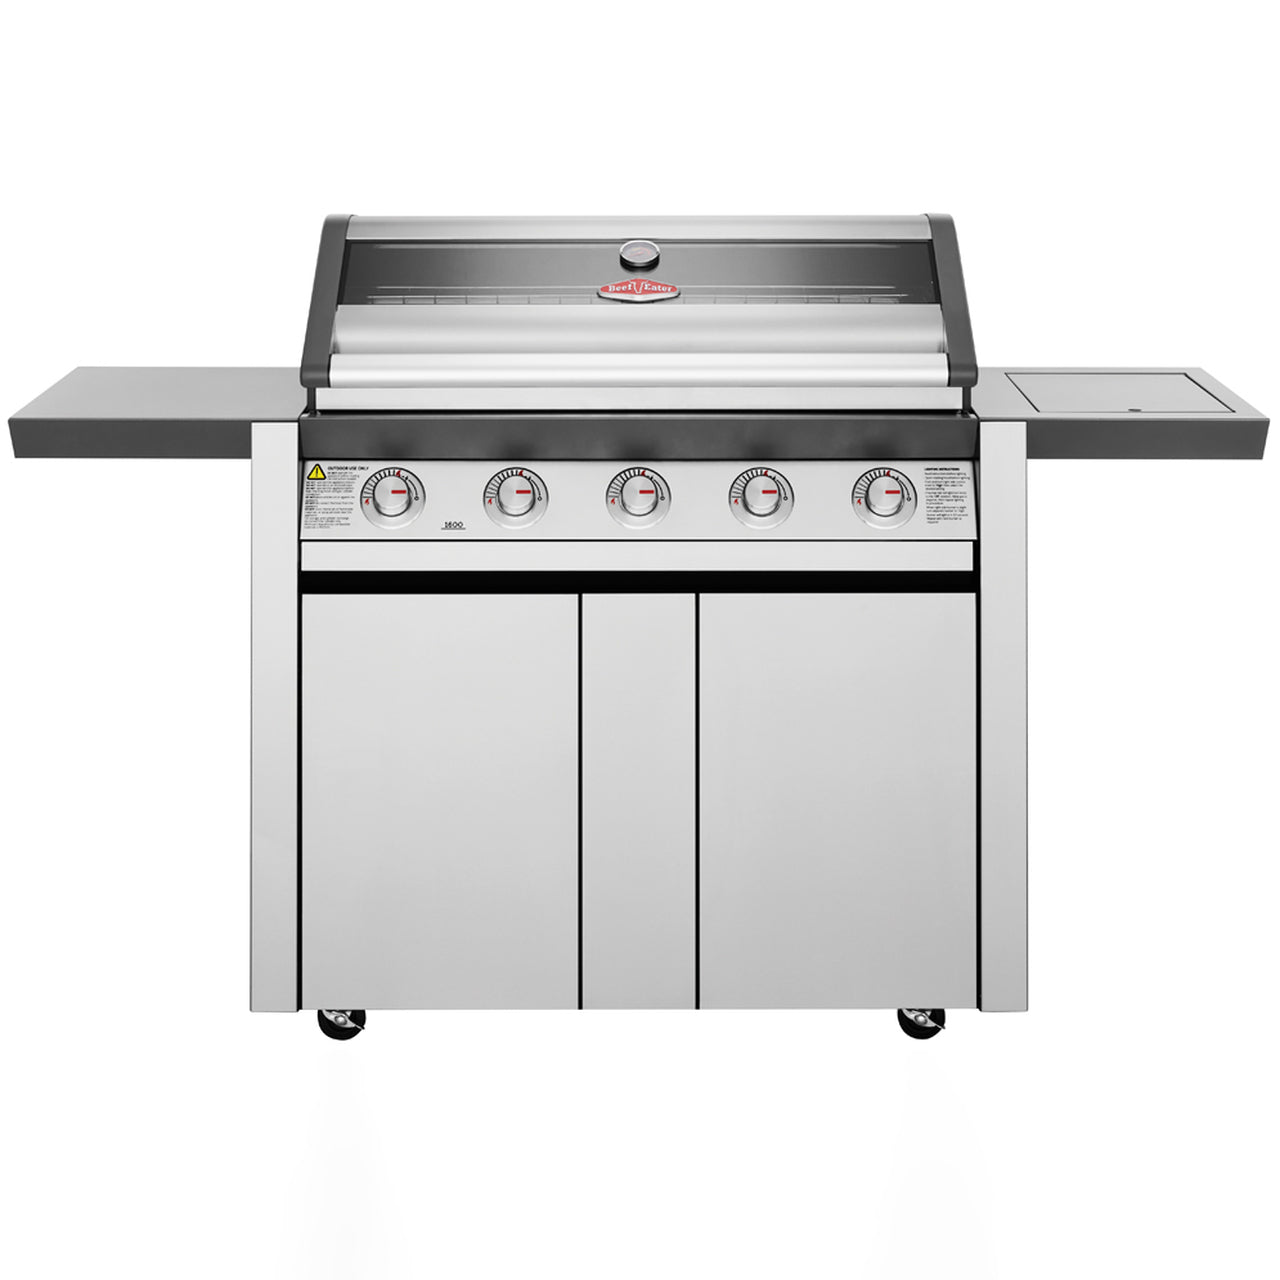 Beefeater 1600s 5 Burner Cabinet Gas Bbq with Side Burner